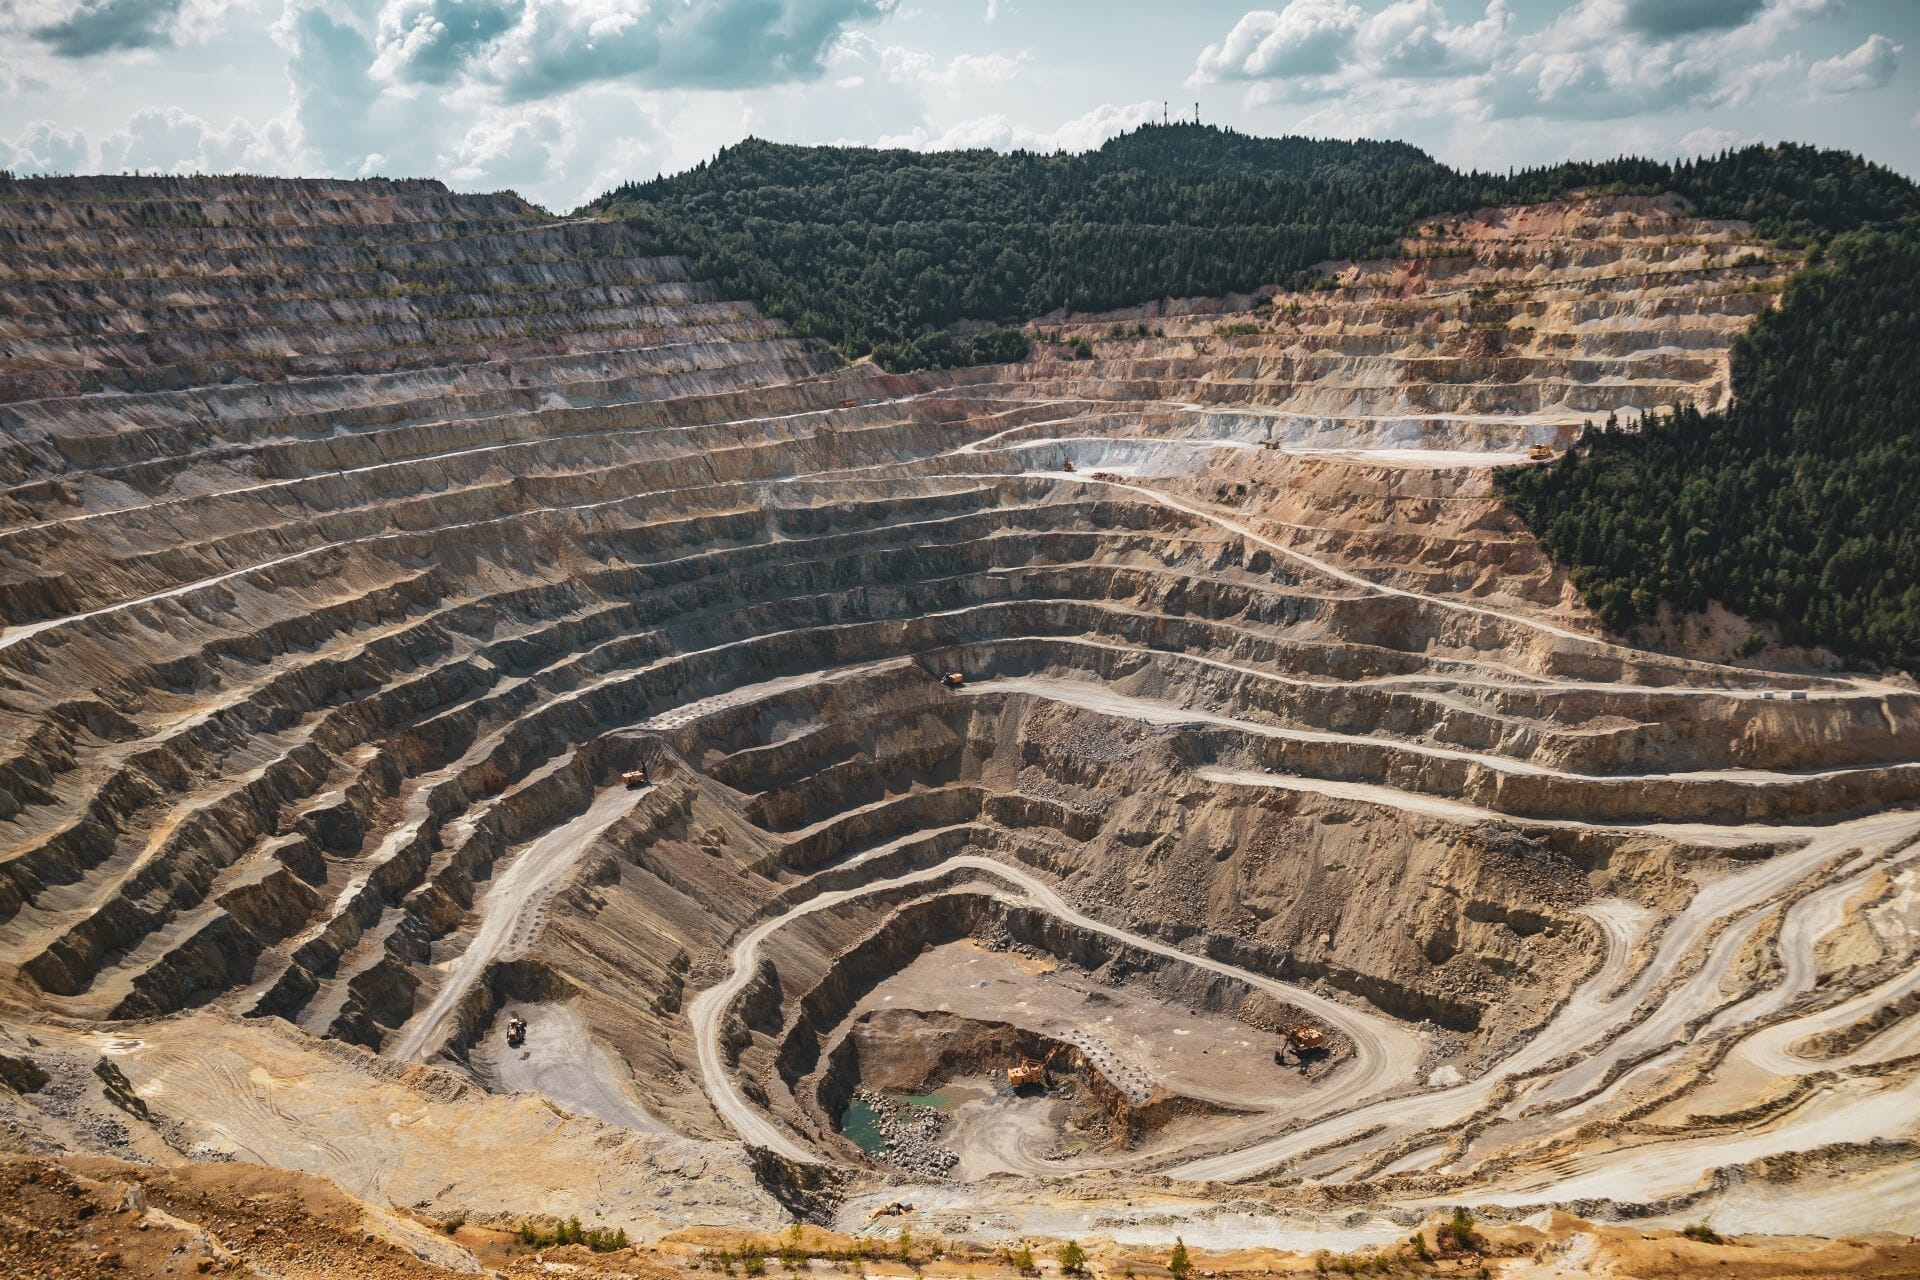 Large pit of former mine showing tremendous erosion and sediment displacement.